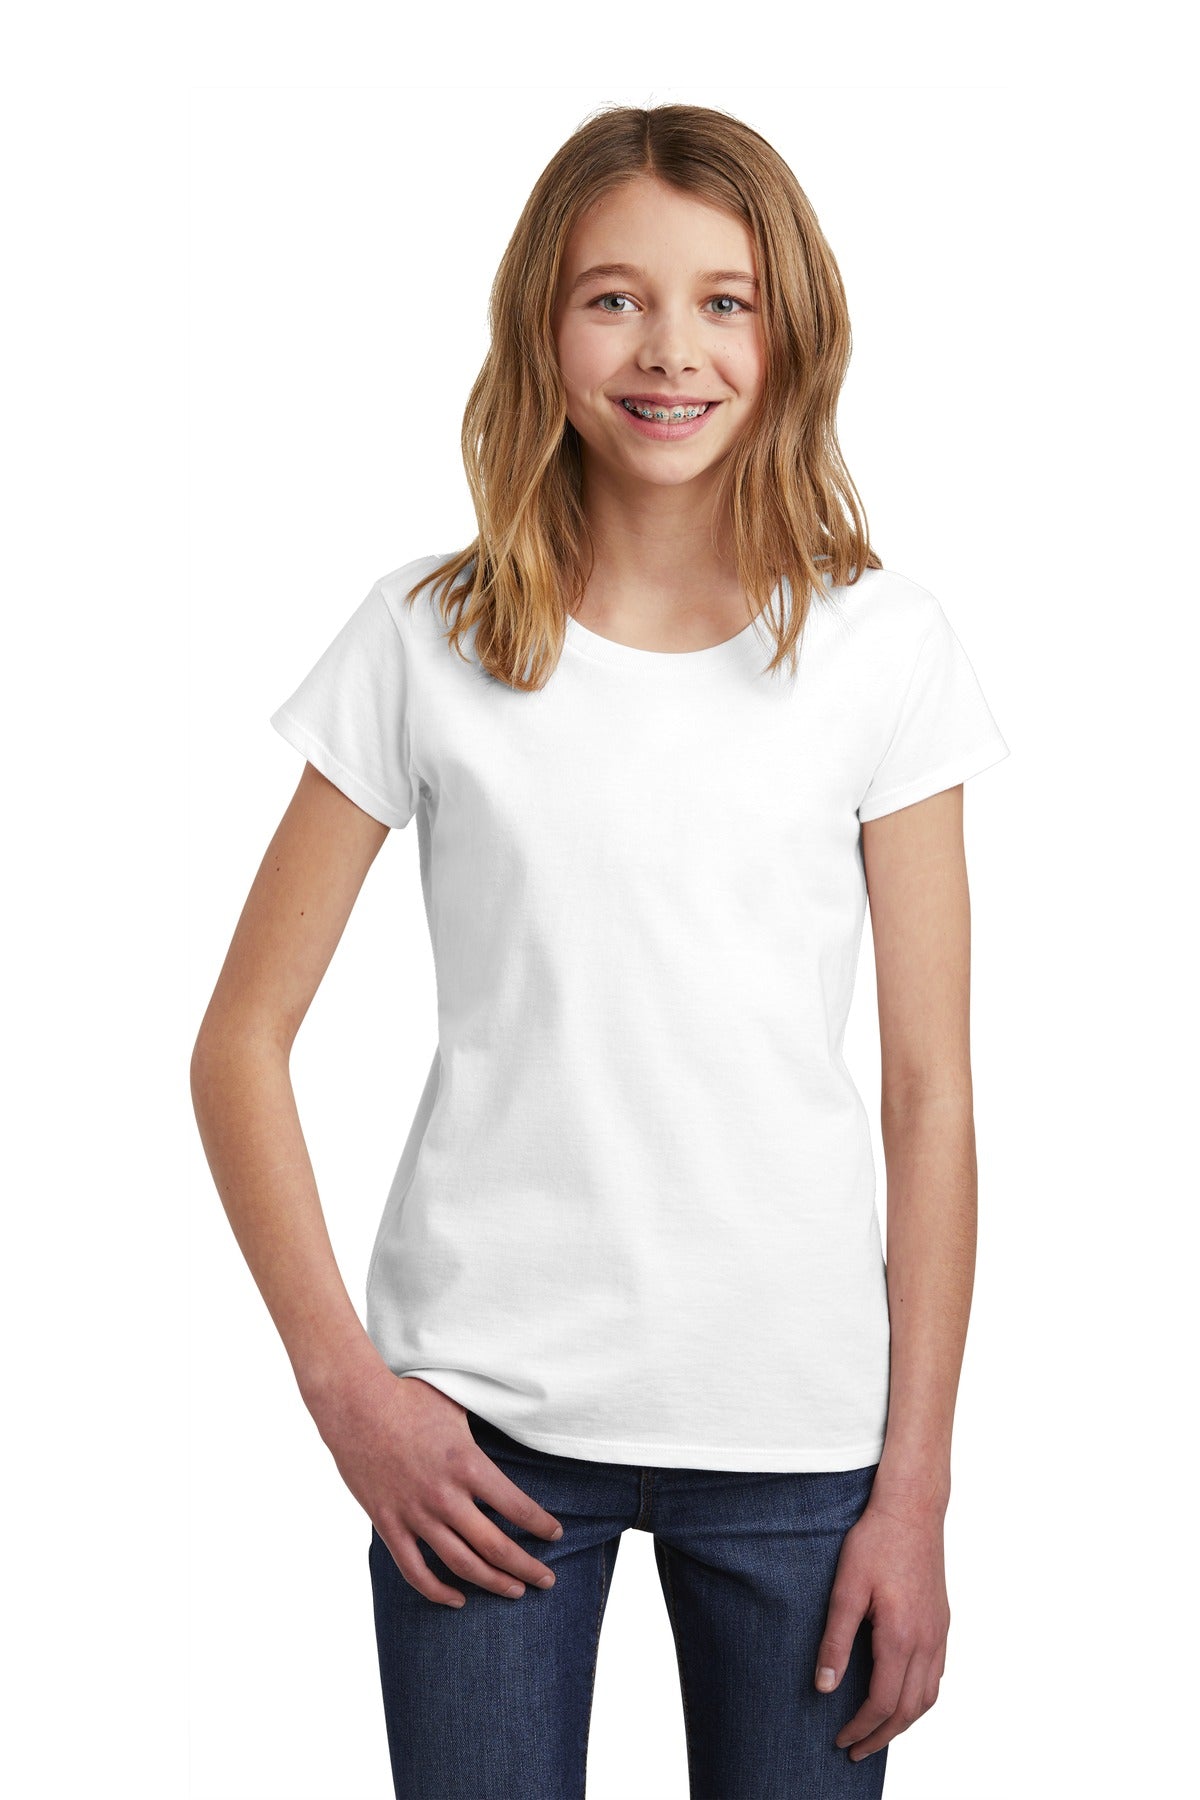 District ® Girls Very Important Tee ® .DT6001YG - DFW Impression